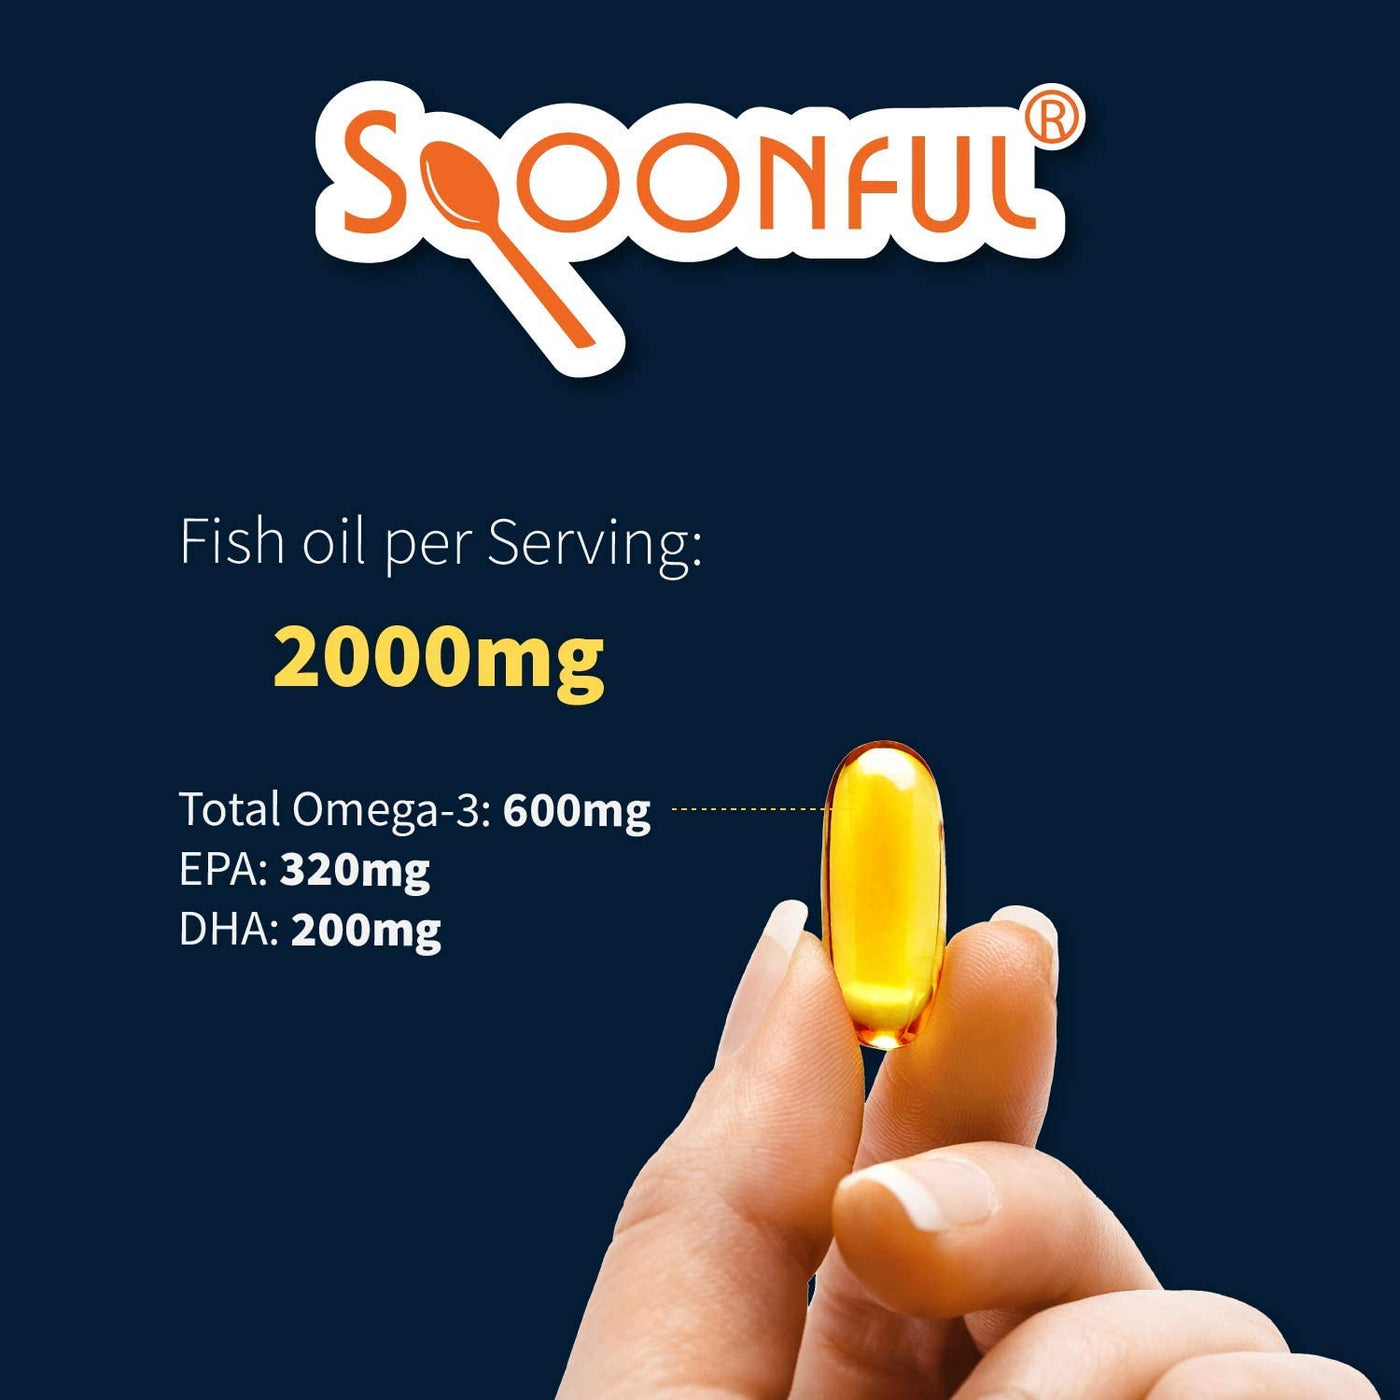 Spoonful Omega 3 Fish Oil 2000 mg, 100 Capsules, Rapid Release Softgels, NSF - Certified